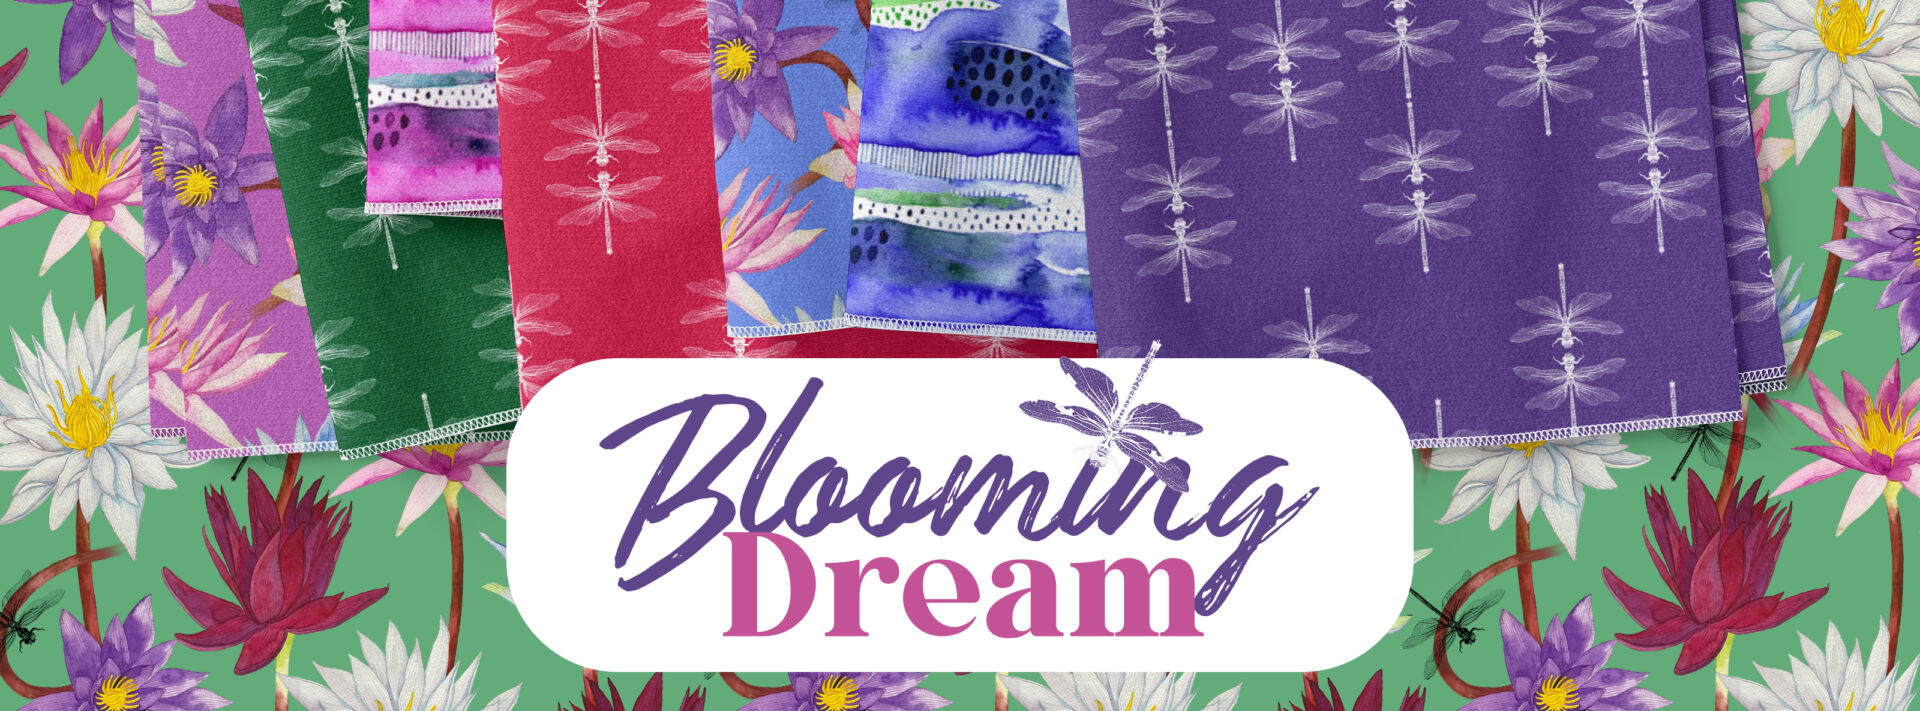 Blooming Dream Banner